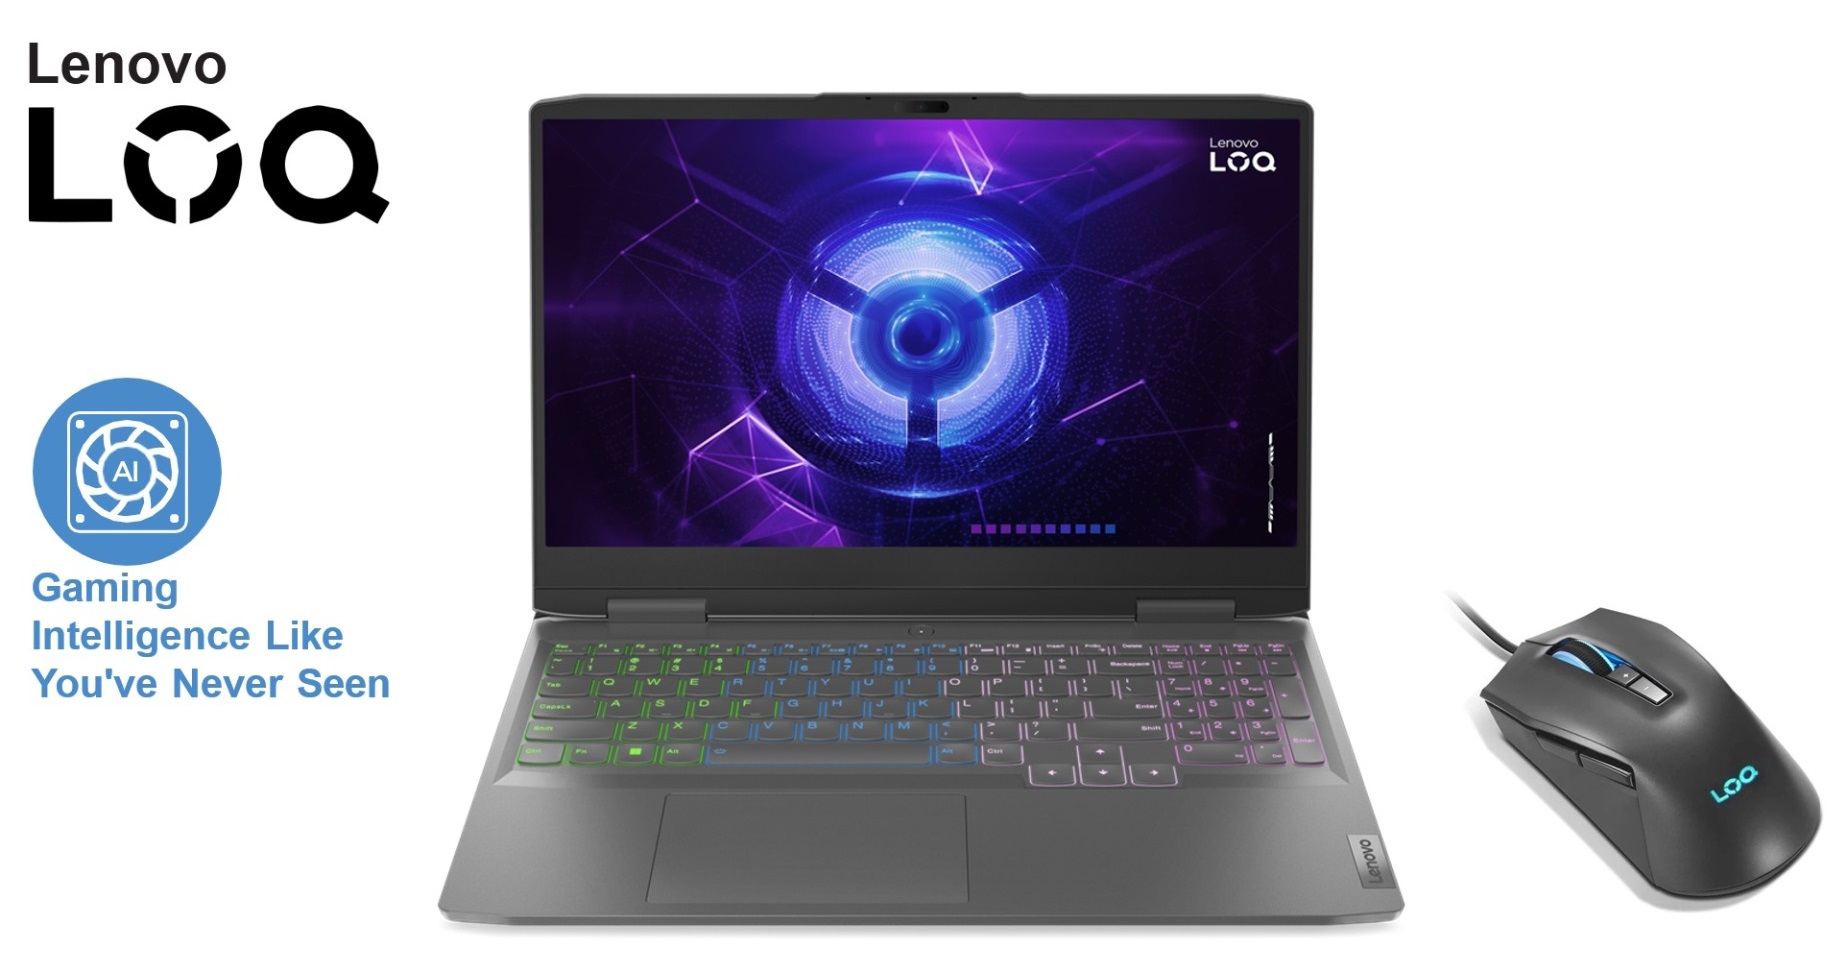 Lenovo LOQ Gaming Laptop, Intel Core i7-13620H, 512GB SSD M.2 2242 PCIe Gen4-4, 16GB RAM, 15.6 Inch FHD 144Hz, NVIDIA GeForce RTX 4050 6GB GDDR6, FreeDos - Storm Grey with Gift Mouse